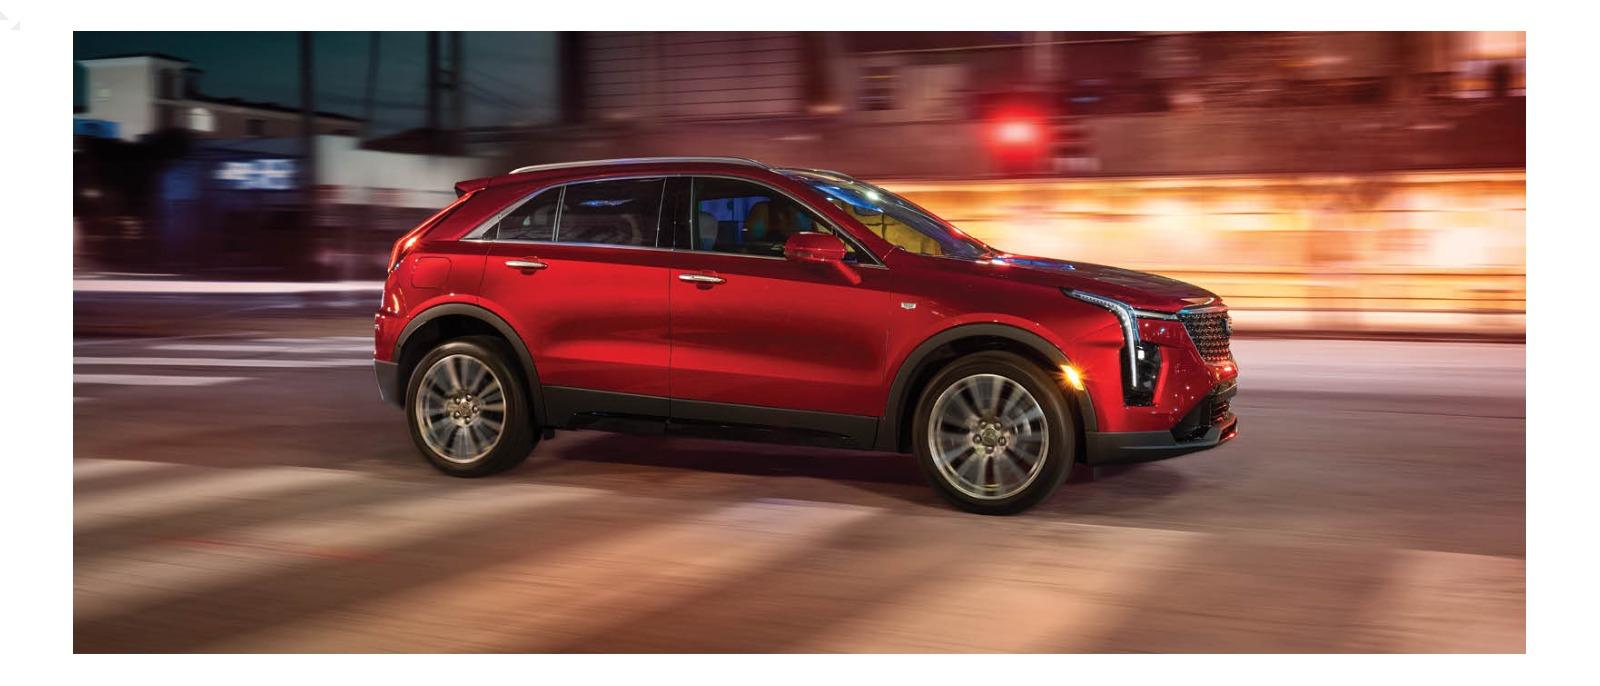 Welcome to McLaughlin Cadillac - a metallic red Cadillac SUV driving on a street